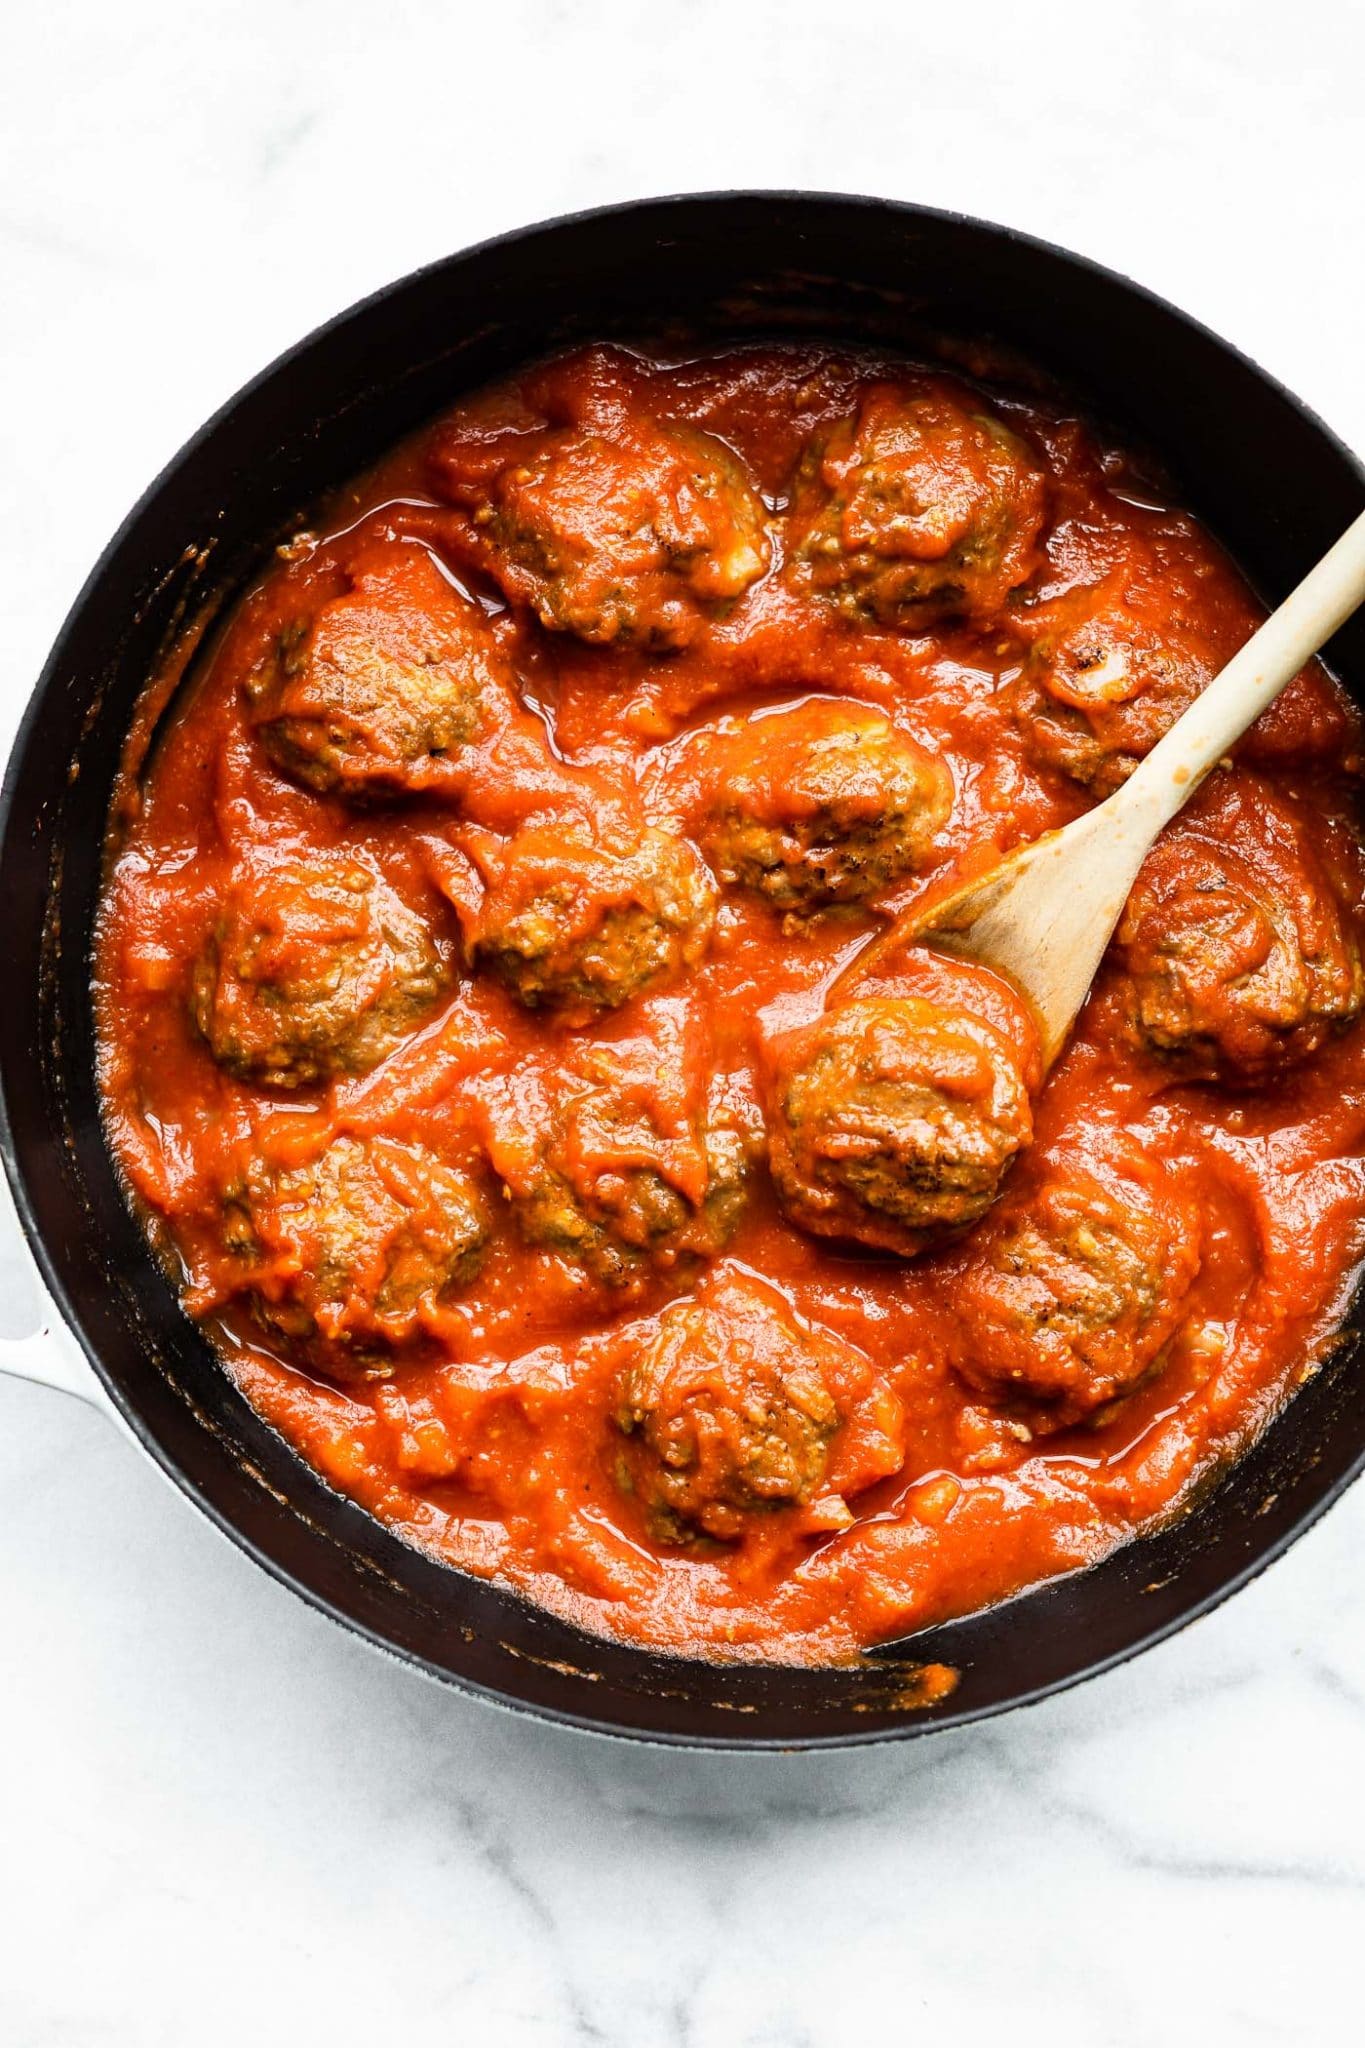 Overhead image of a skillet with meatballs and sauce with a wooden spoon.